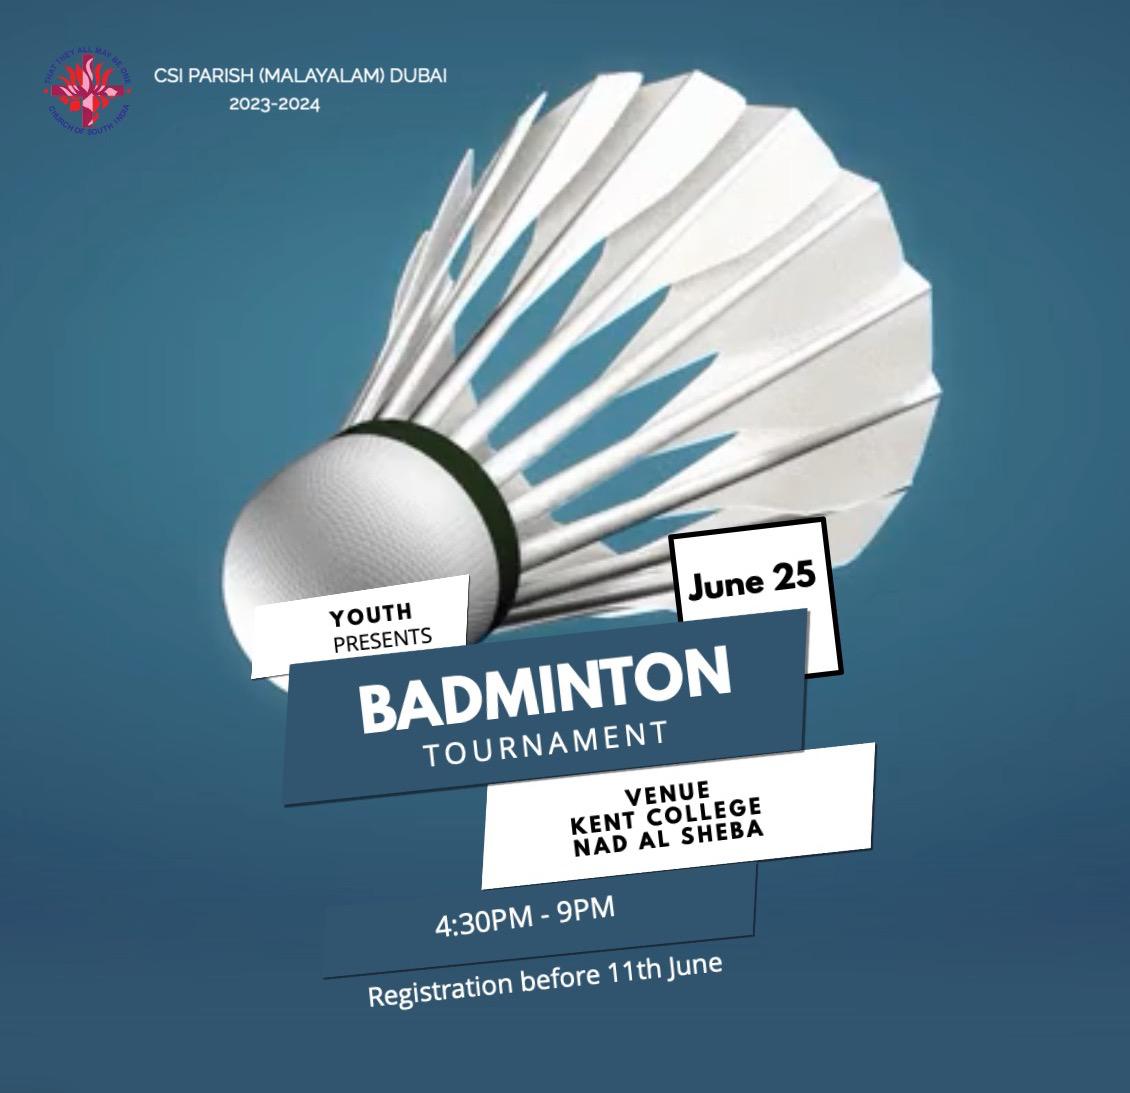 Youth Movement Annual Sports Event - Badminton Tournament